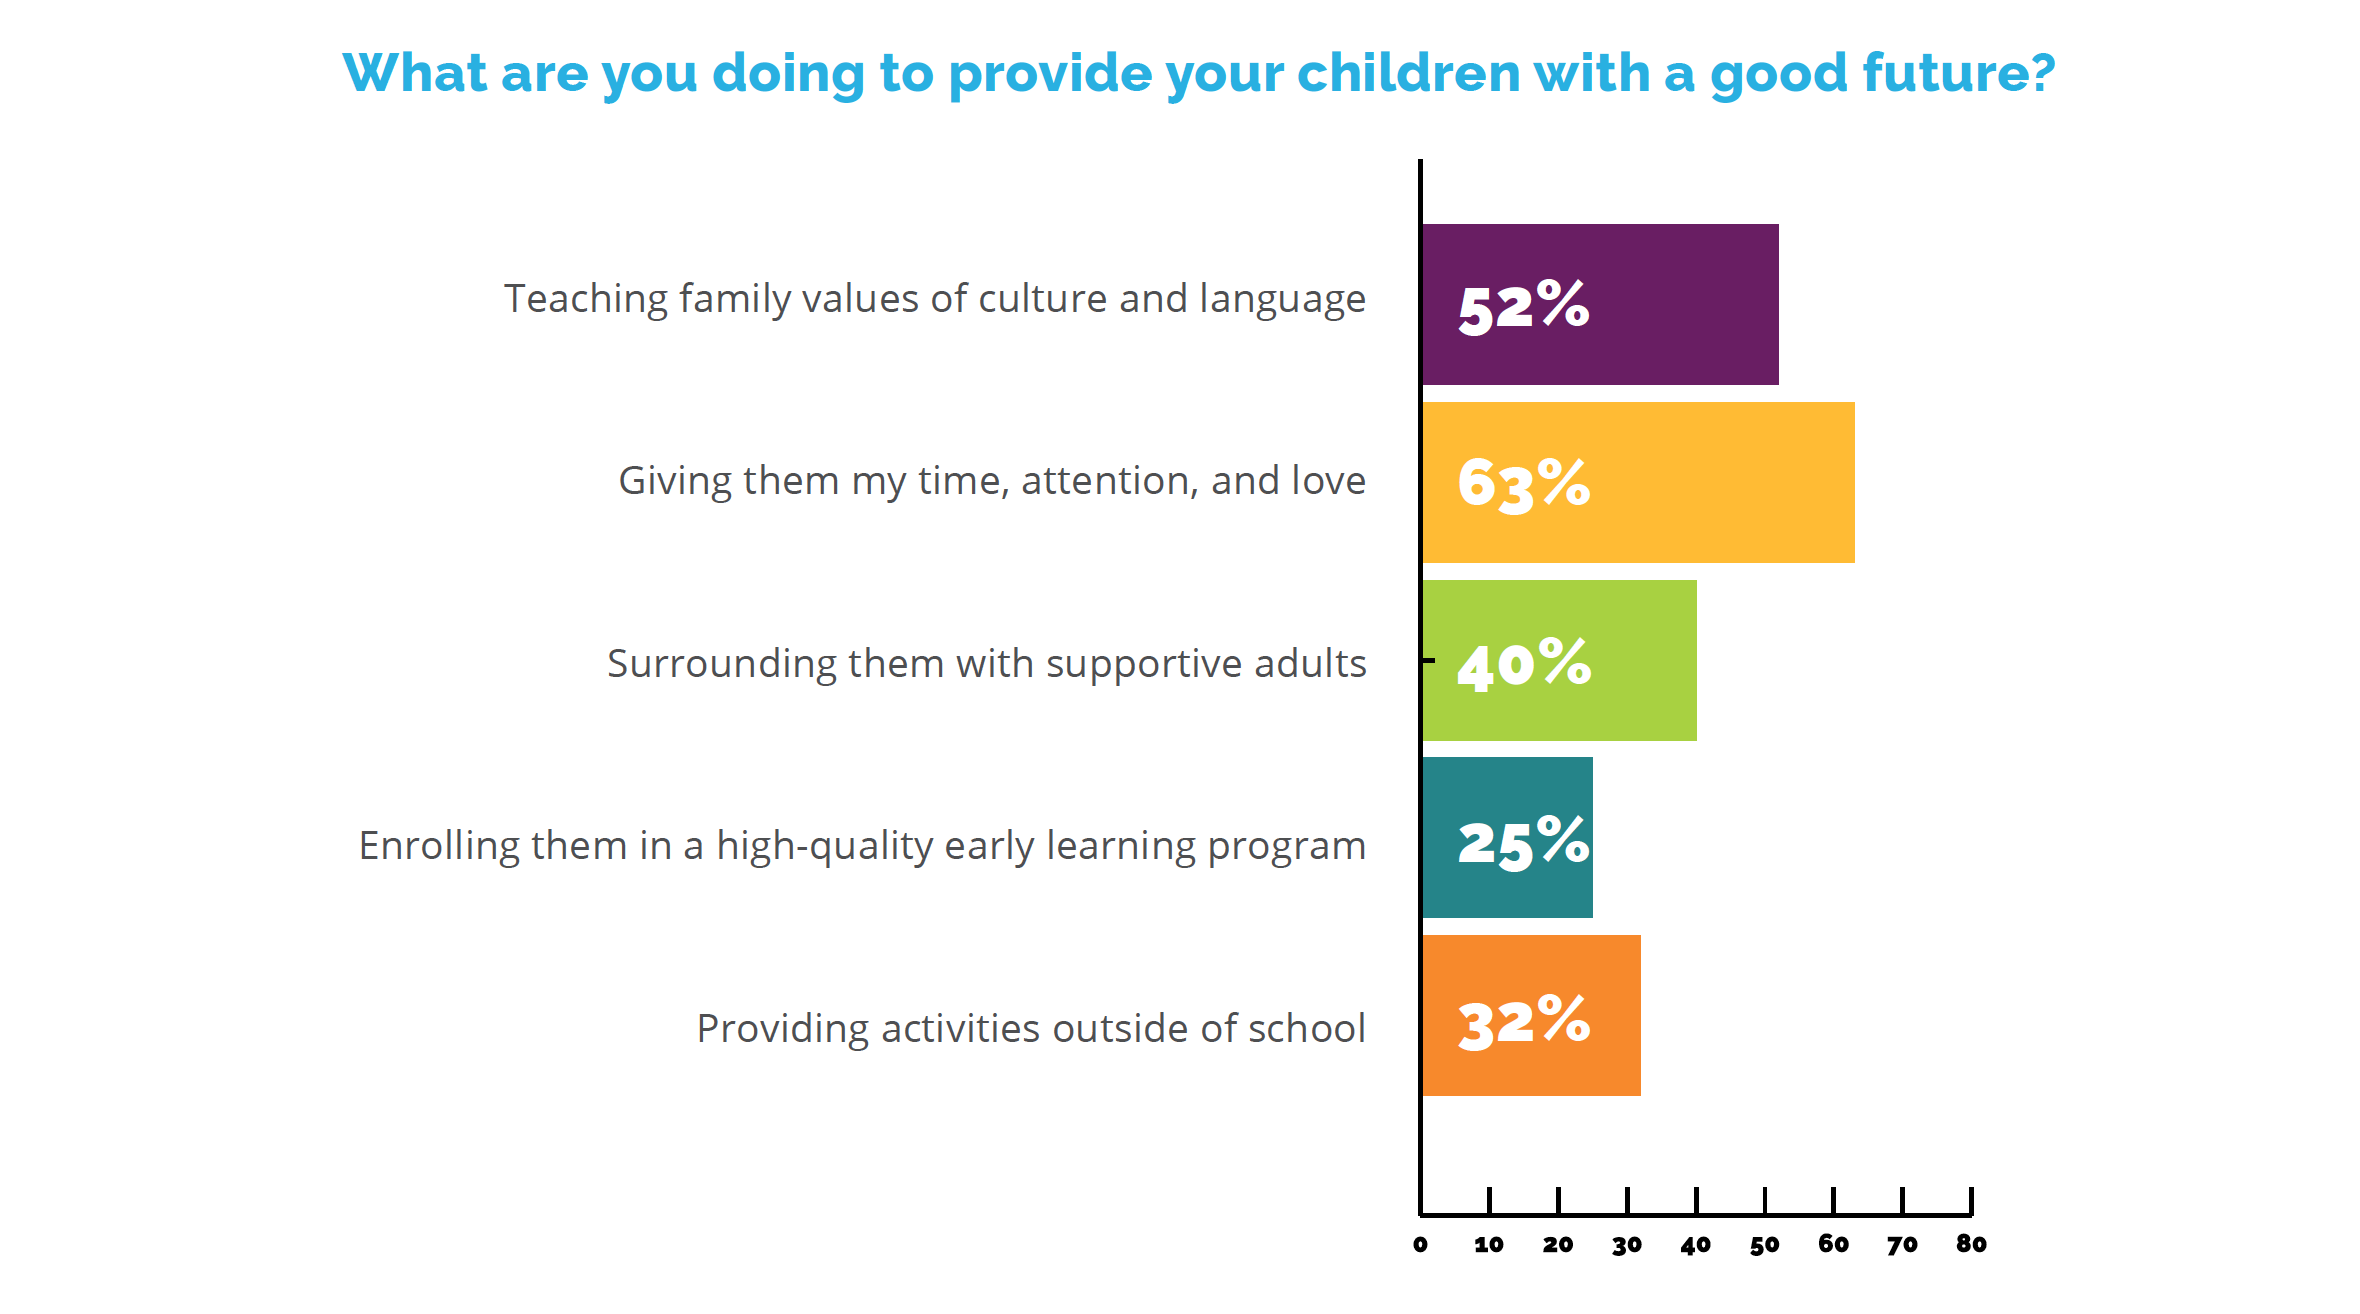 Infographic about what parents are doing to provide their children with a good future. More details available at (213) 346-3216.